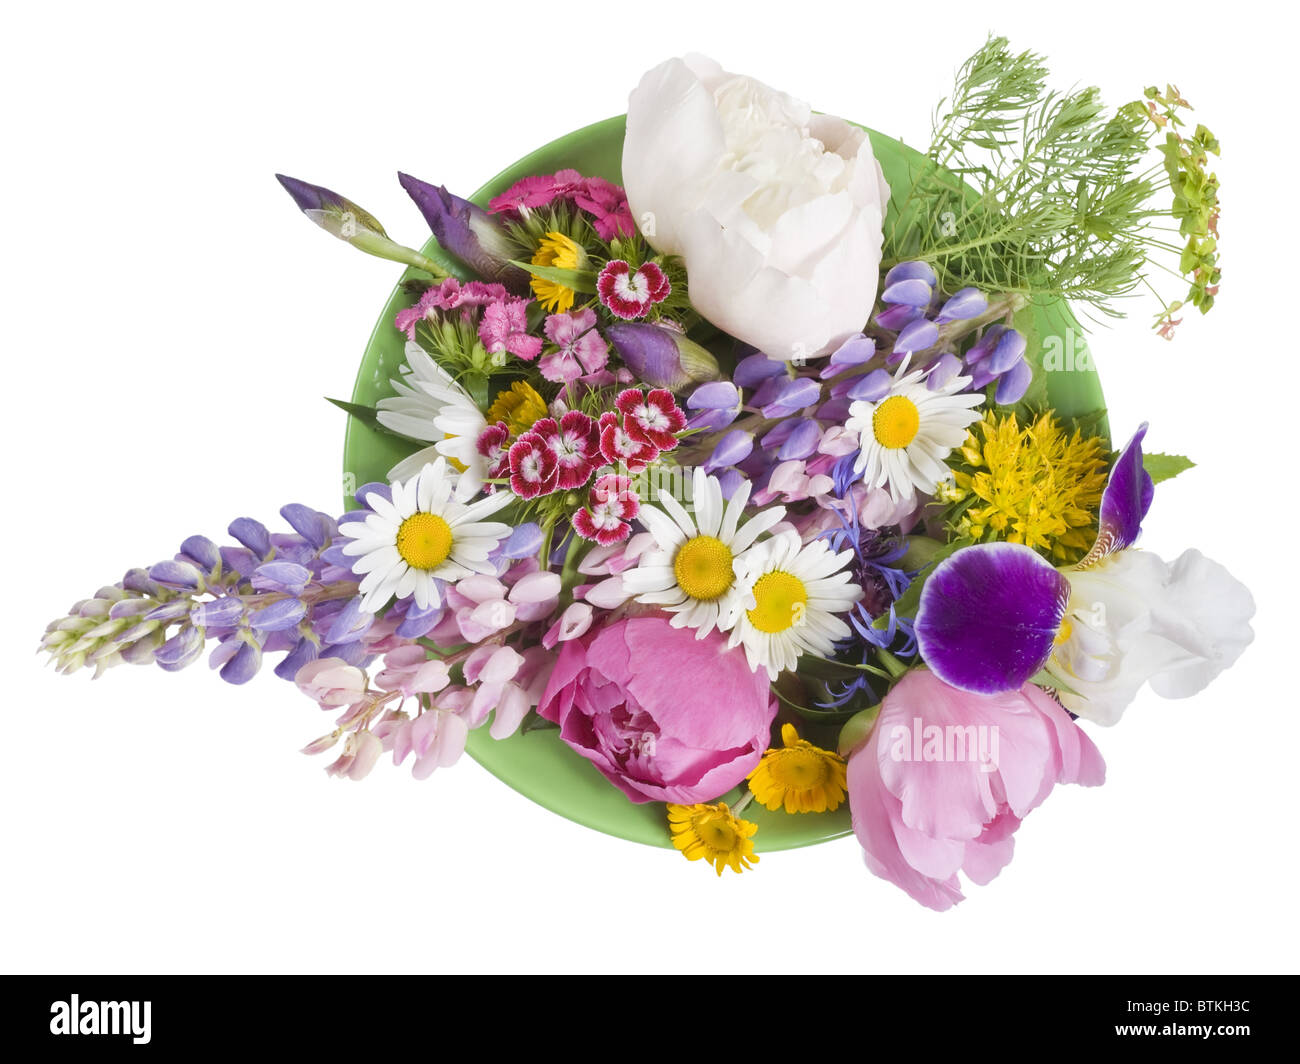 Green plate with June flowers Stock Photo